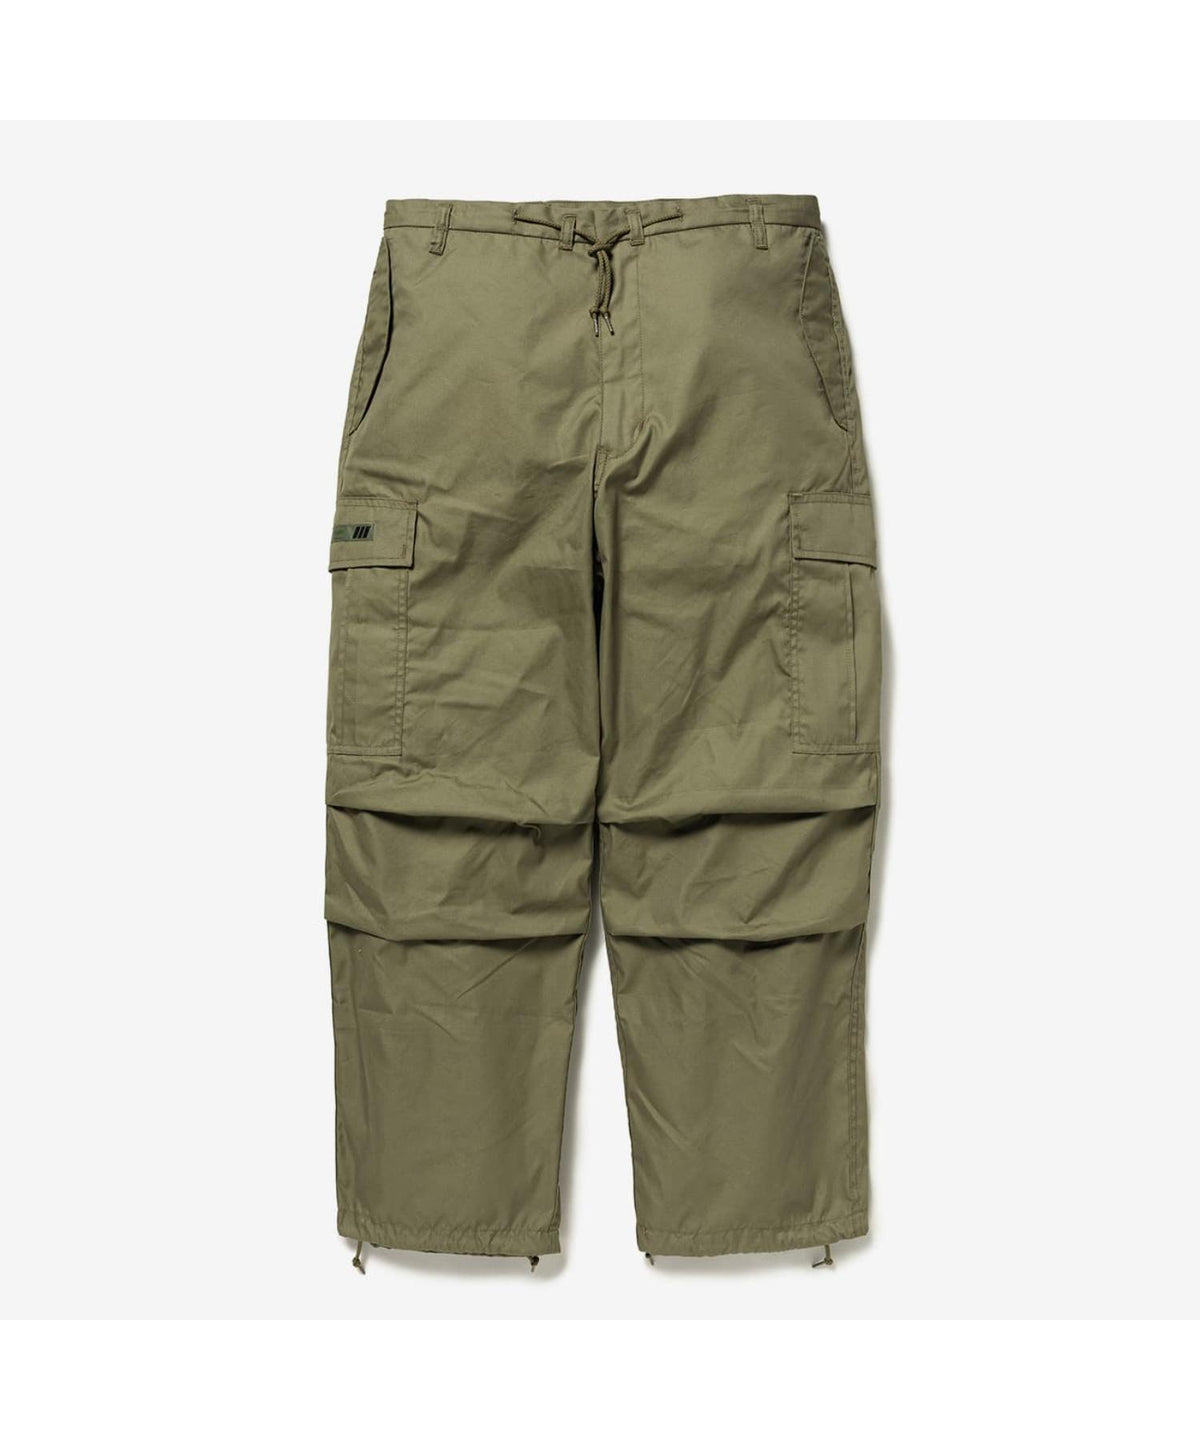 MILT0001 / TROUSERS / NYCO. OXFORD